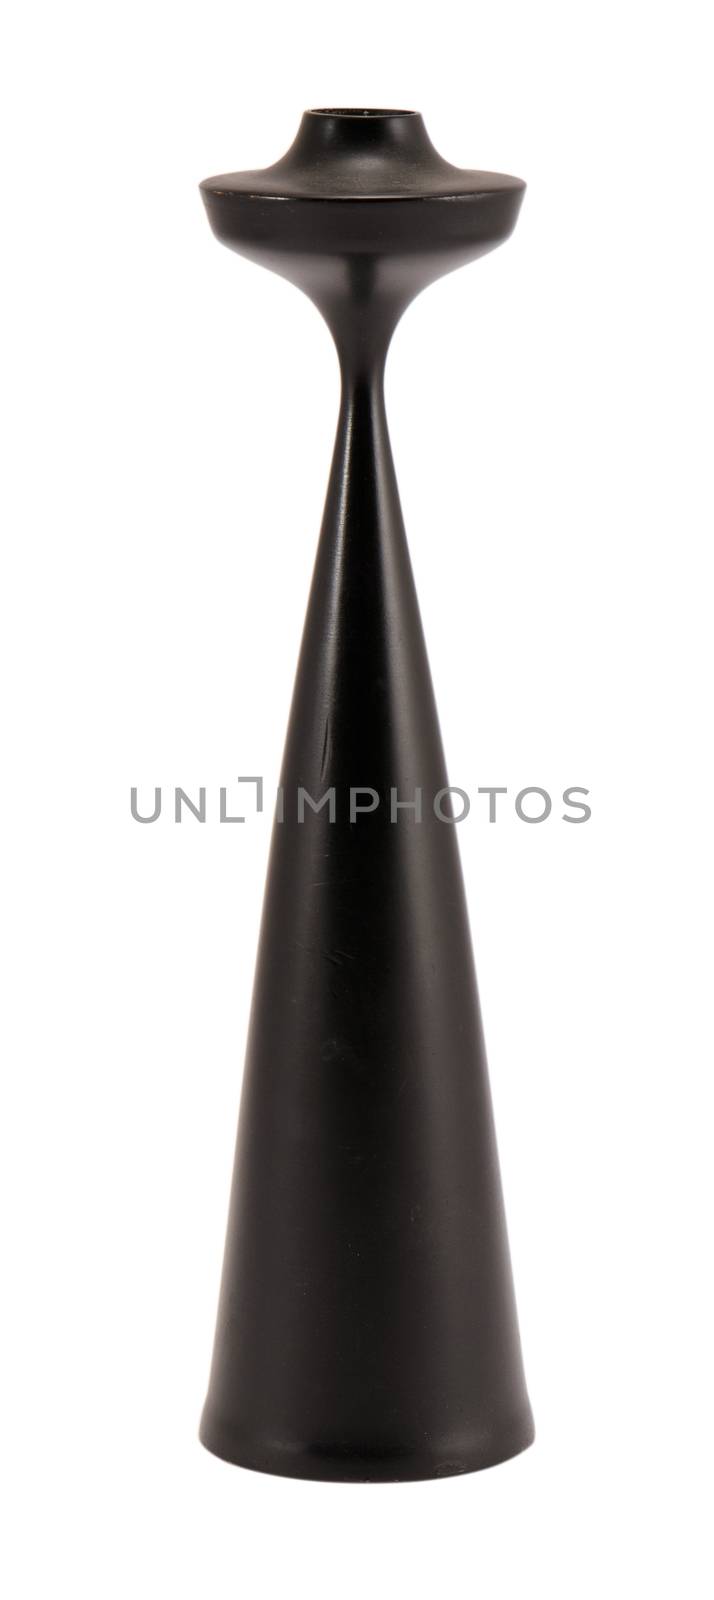 wooden black vintage curvy candlestick candle stick isolated on white background.